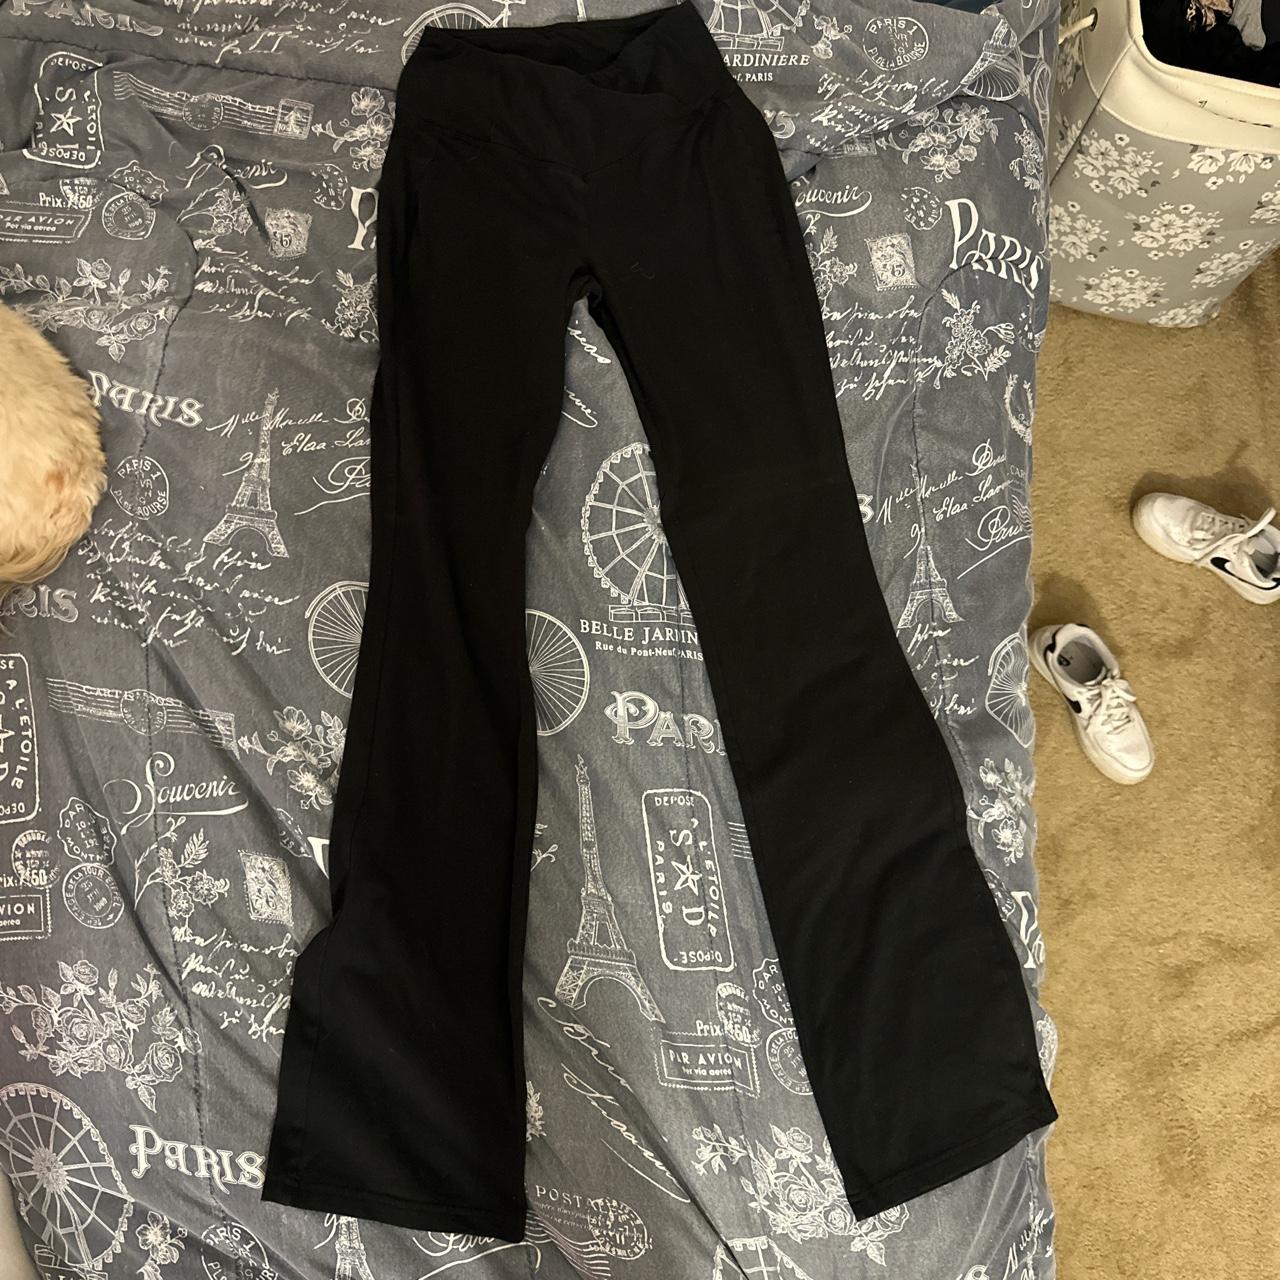 Arie tan leggings with mesh on thighs and lower legs - Depop